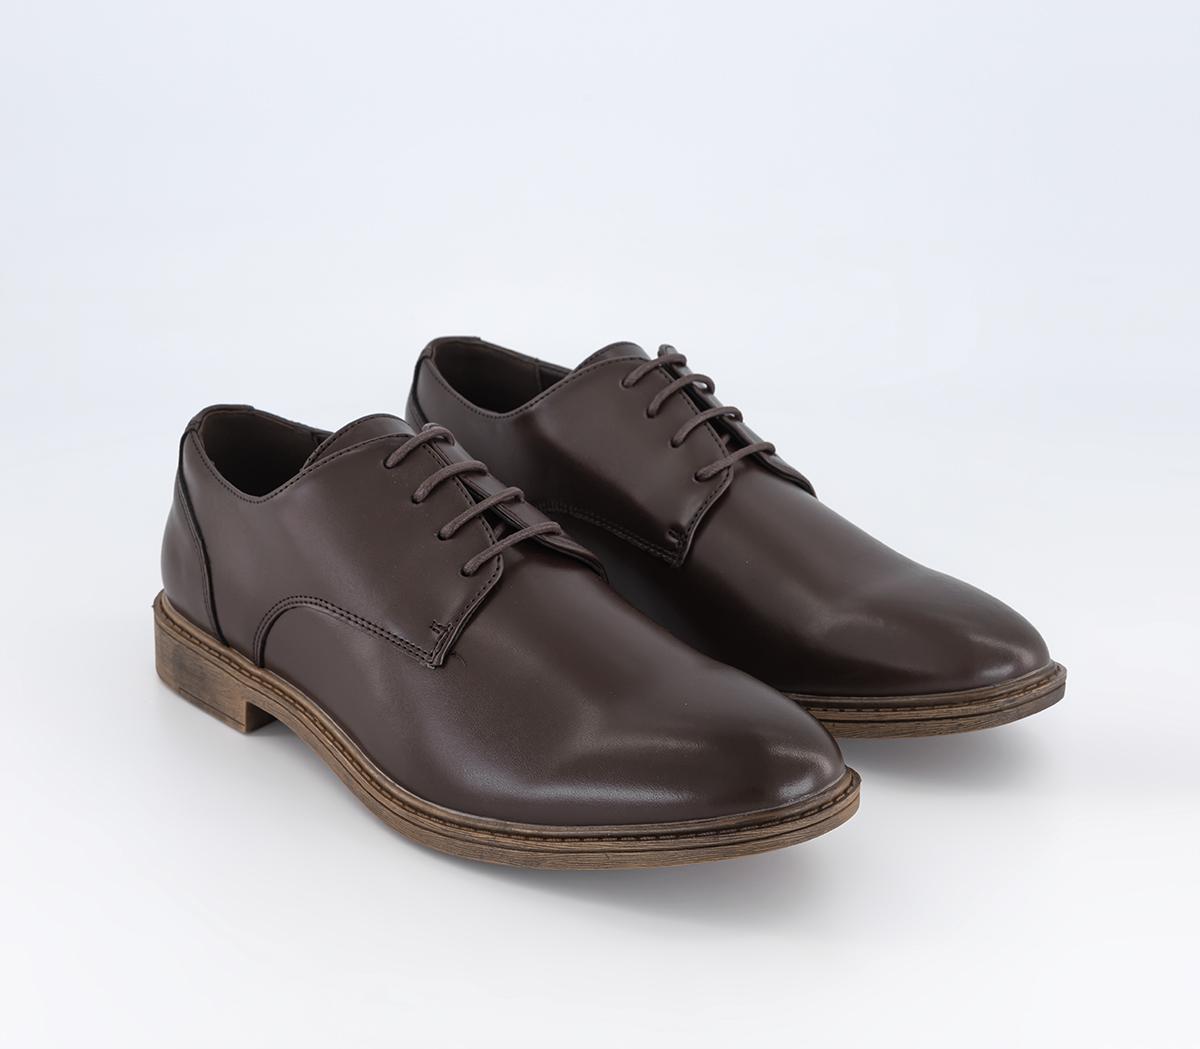 OFFICE Mens Curton Leather Derby Shoes Brown Leather, 7